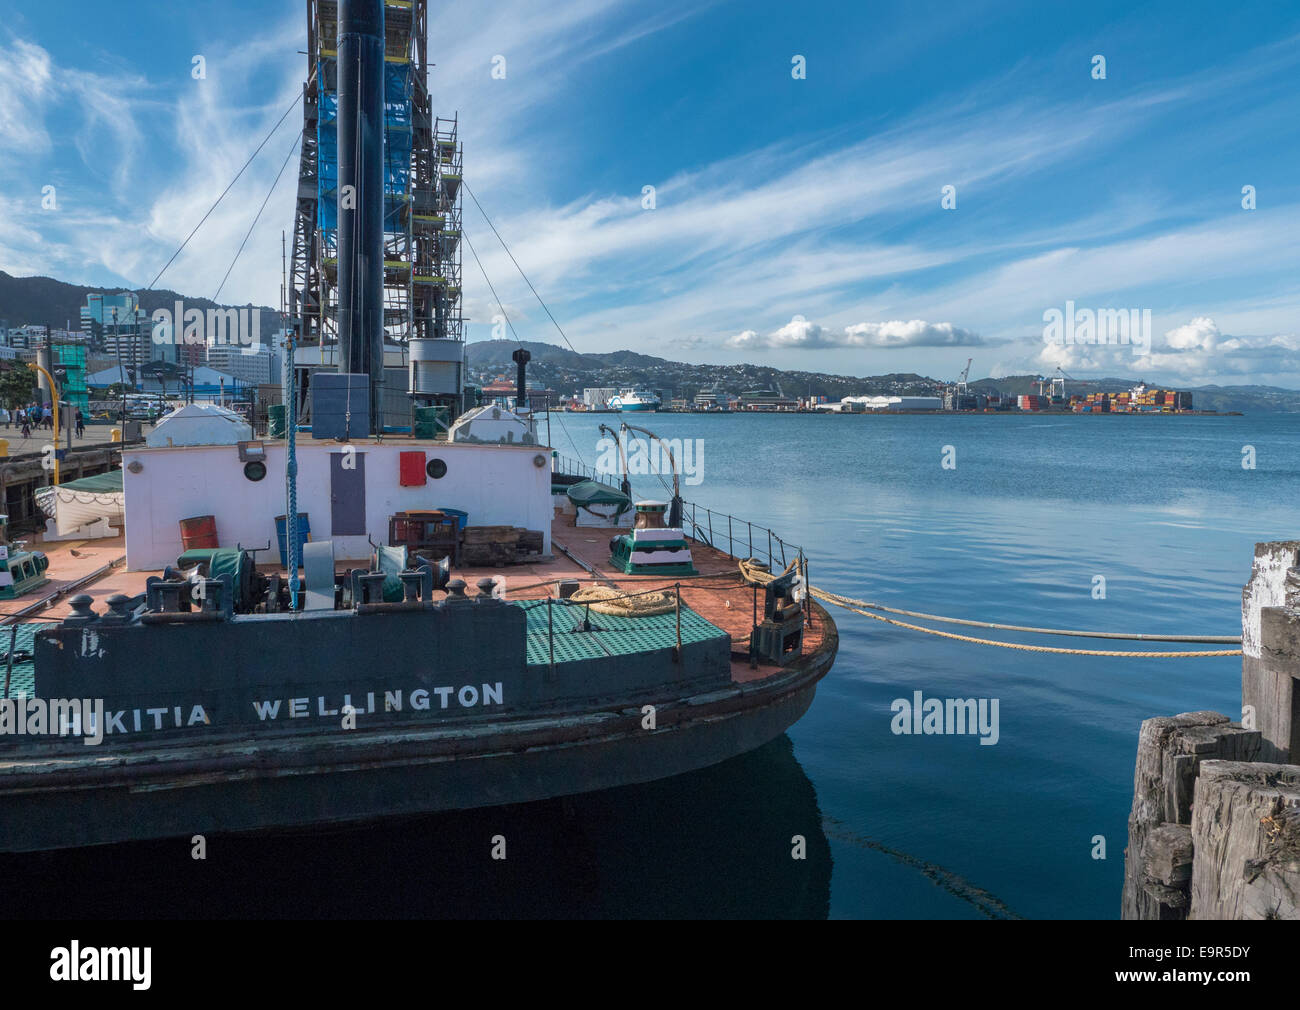 The stern of Hikitia, an historic steam powered floating crane moored on Wellington Waterfront, New Zealand Stock Photo